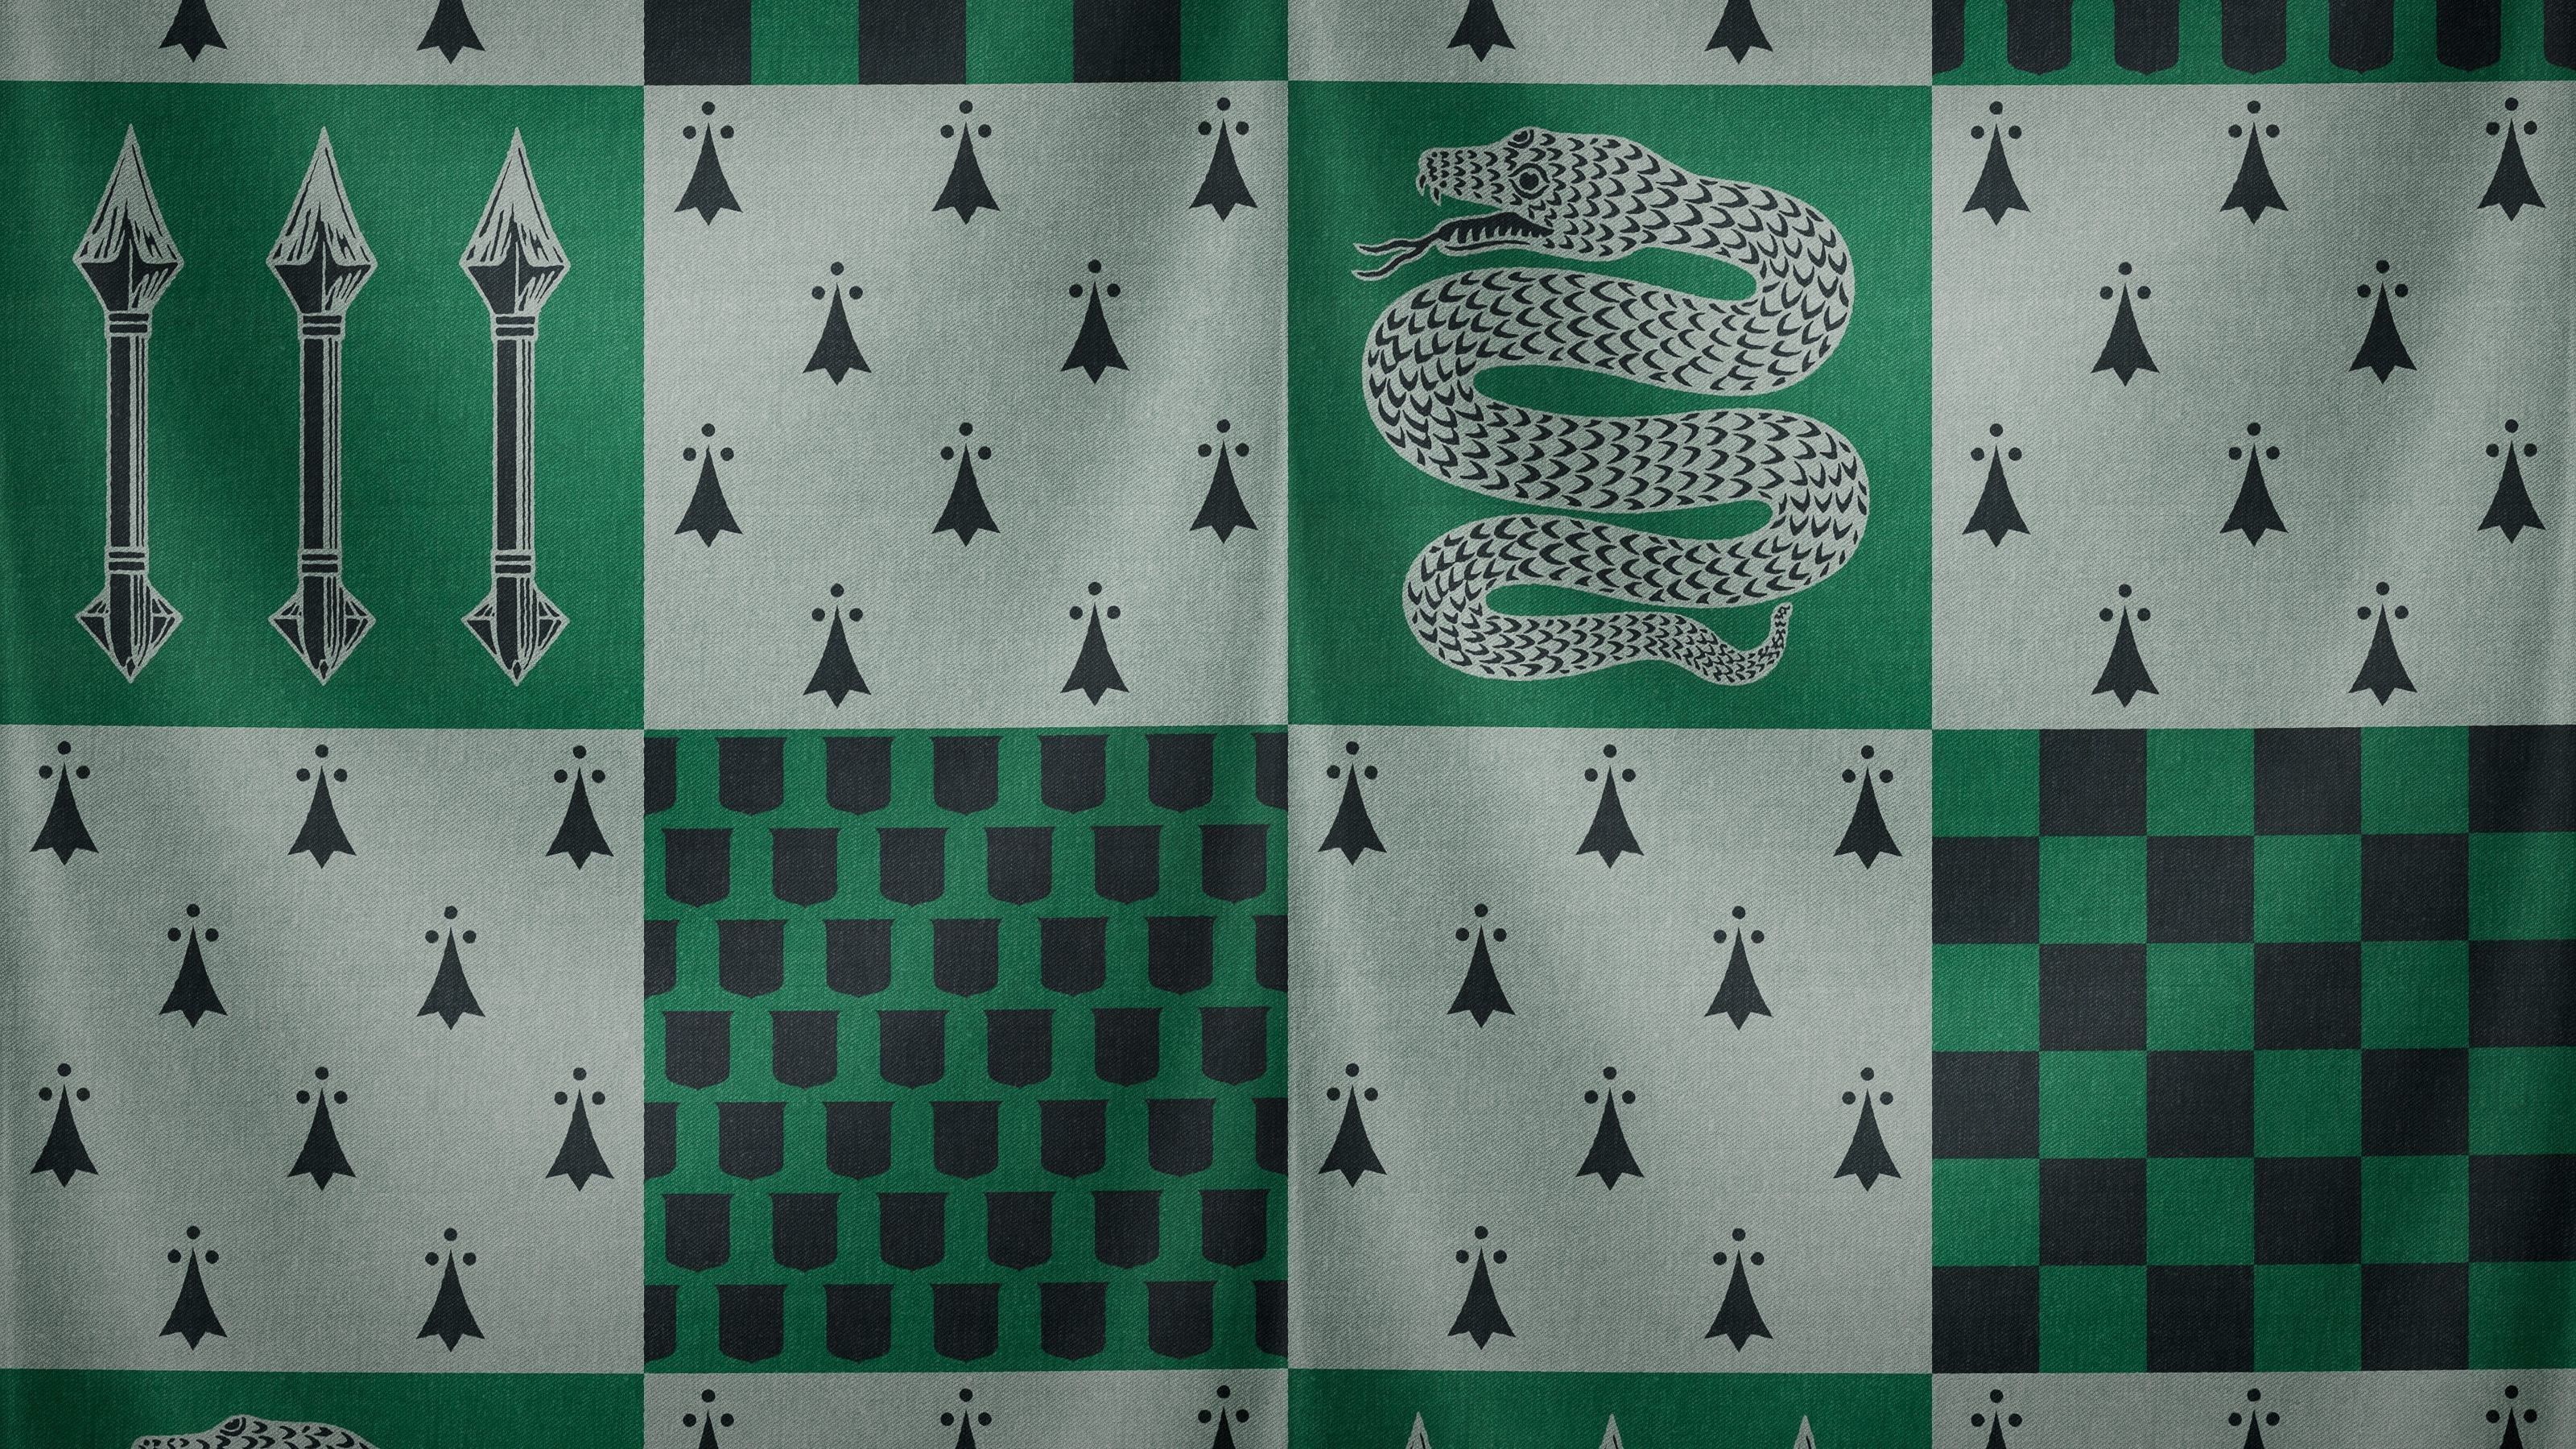 A close-up of the fabric of the Slytherin house robe, featuring the green and silver snake, the green and grey checkered pattern, and the green and grey pattern of quills and arrows. - Slytherin